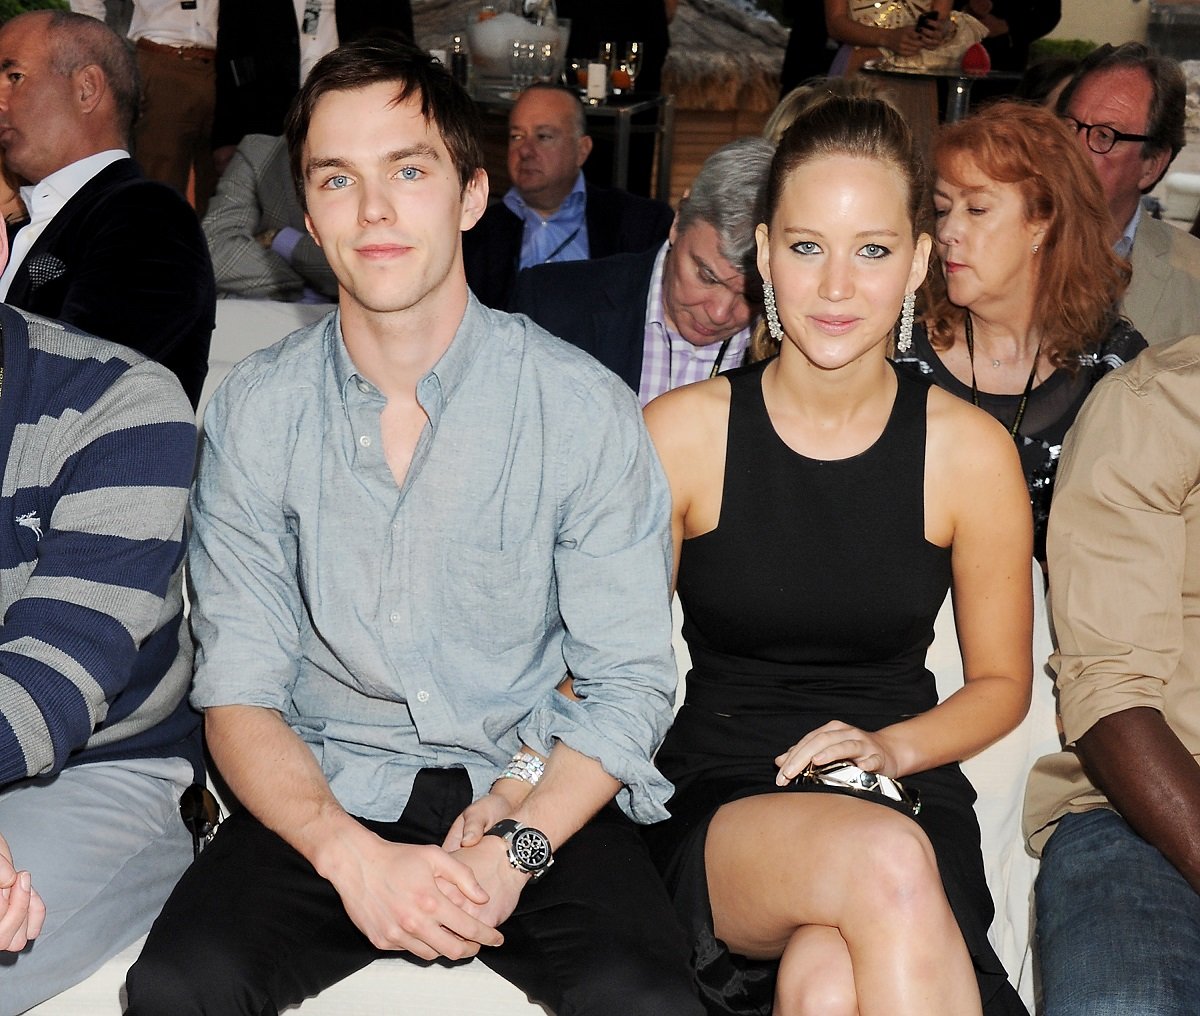 Nicholas Hoult (L) and Jennifer Lawrence on May 25, 2012, in Monaco.